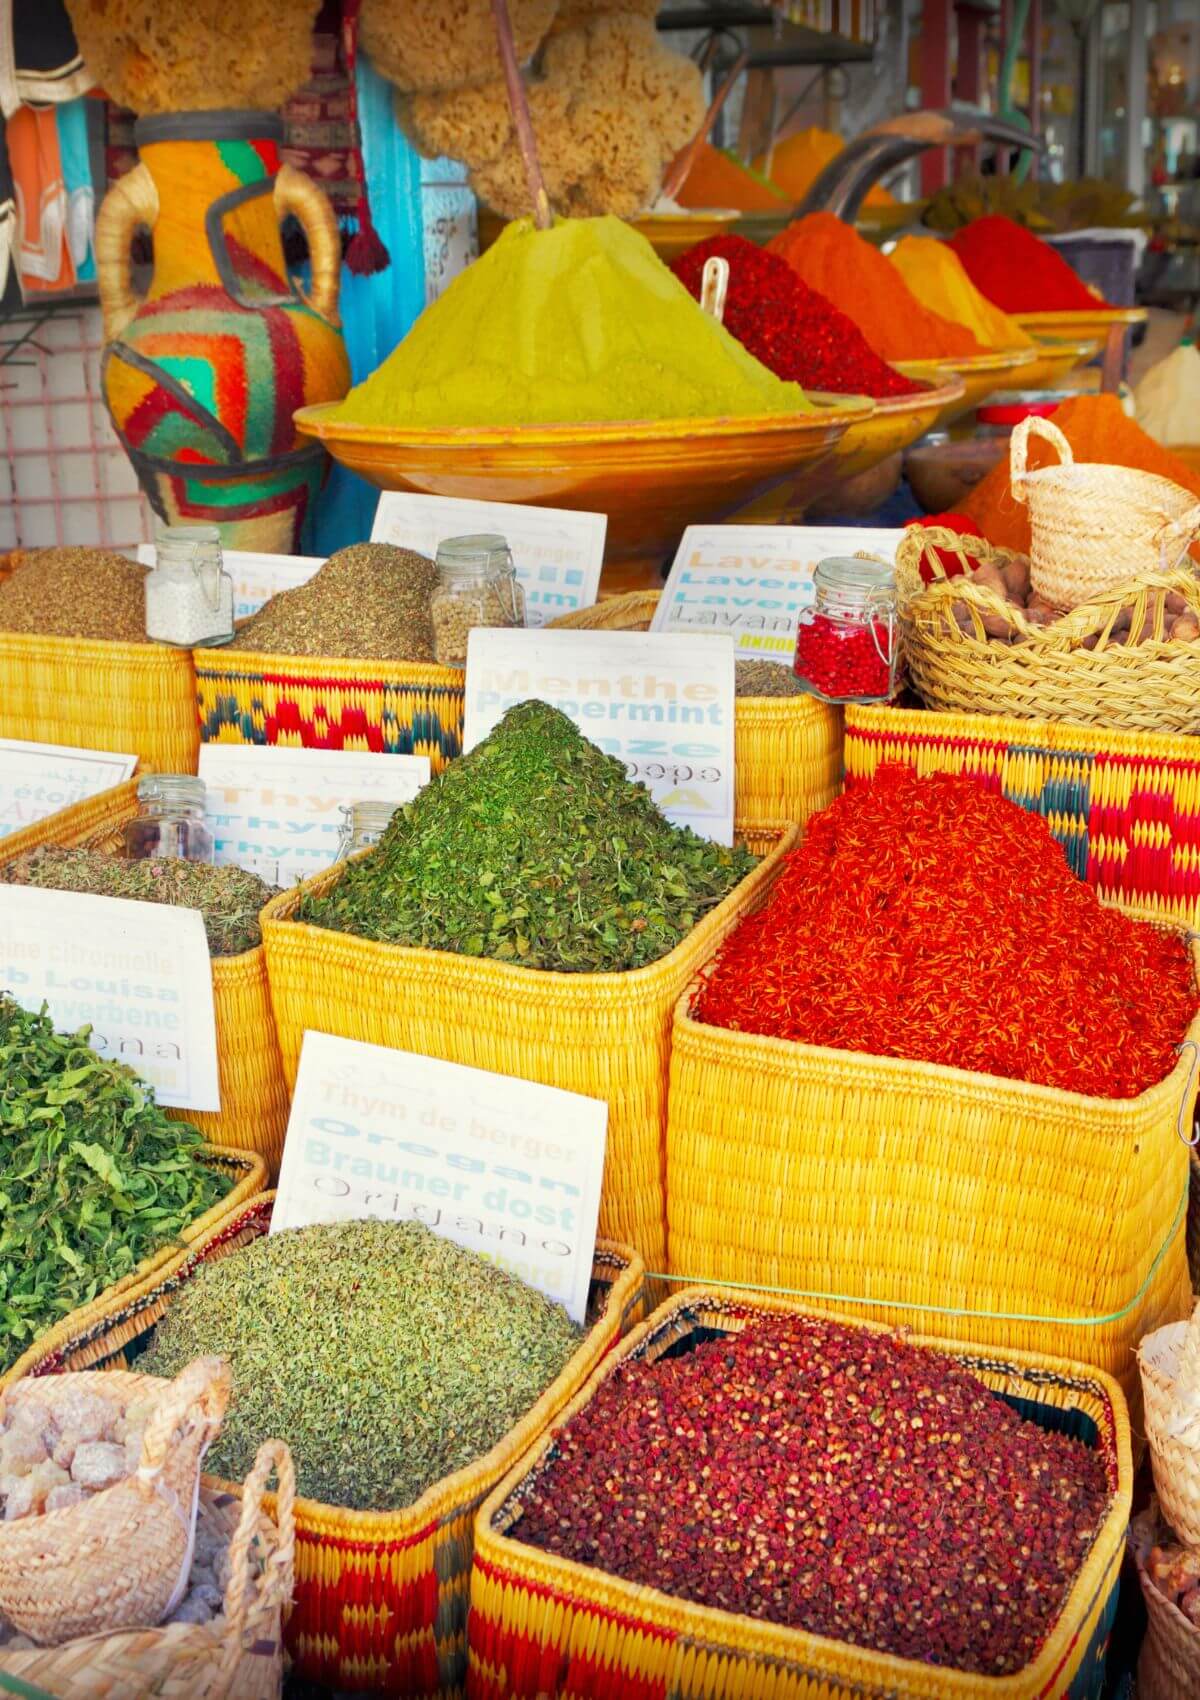 Spice blends make tasty souvenirs from Bali